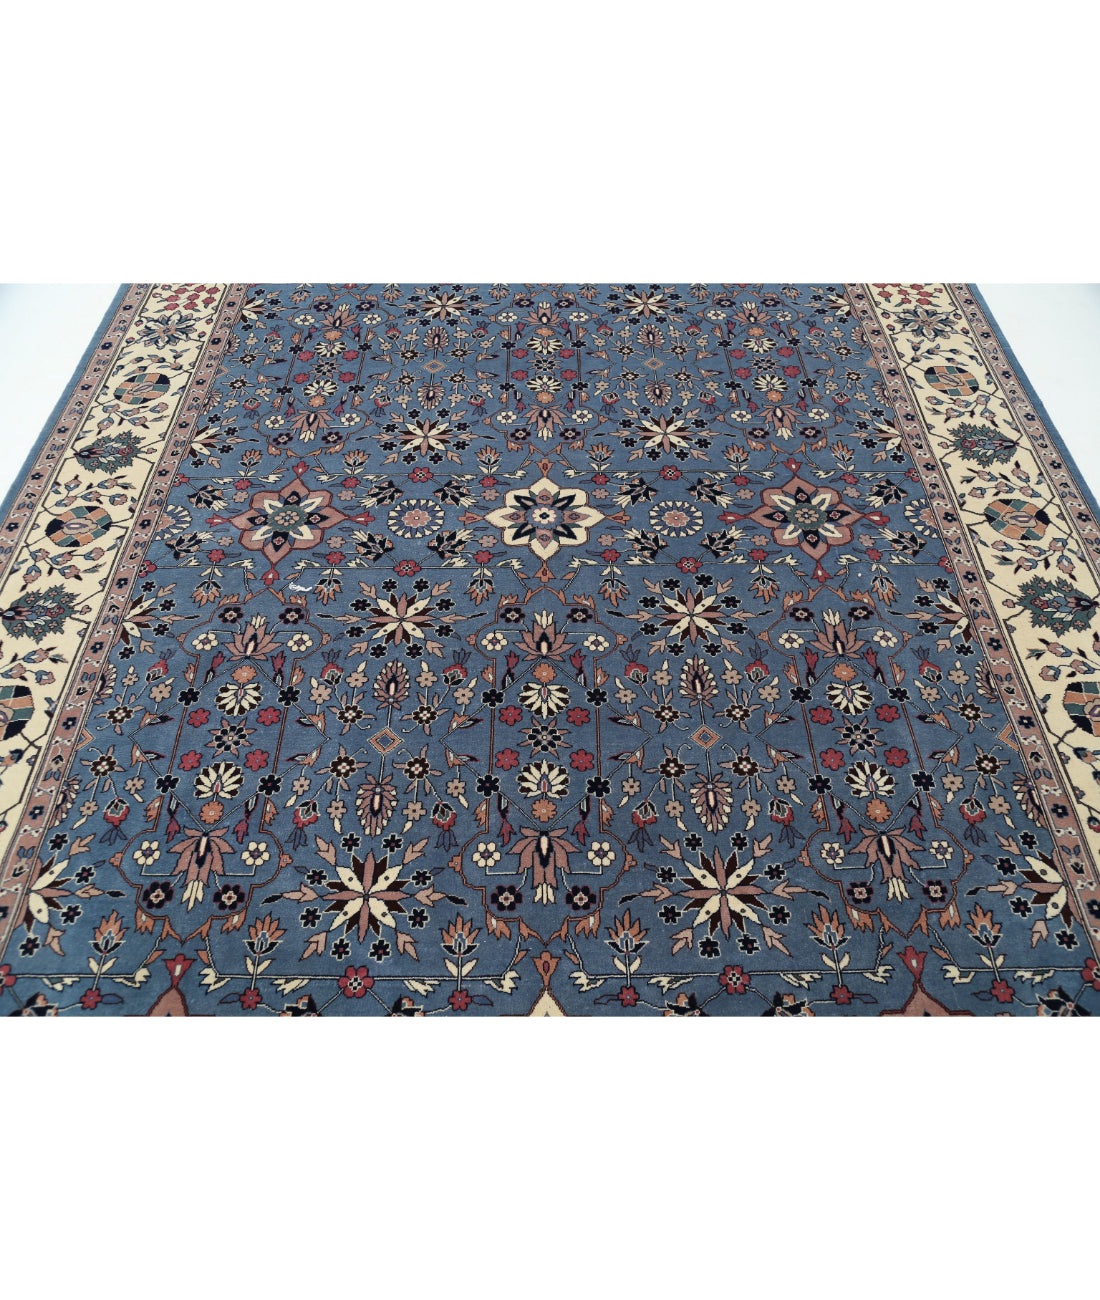 Hand Knotted Heritage Persian Style Wool Rug - 8'1'' x 10'1'' 8'1'' x 10'1'' (243 X 303) / Blue / Ivory